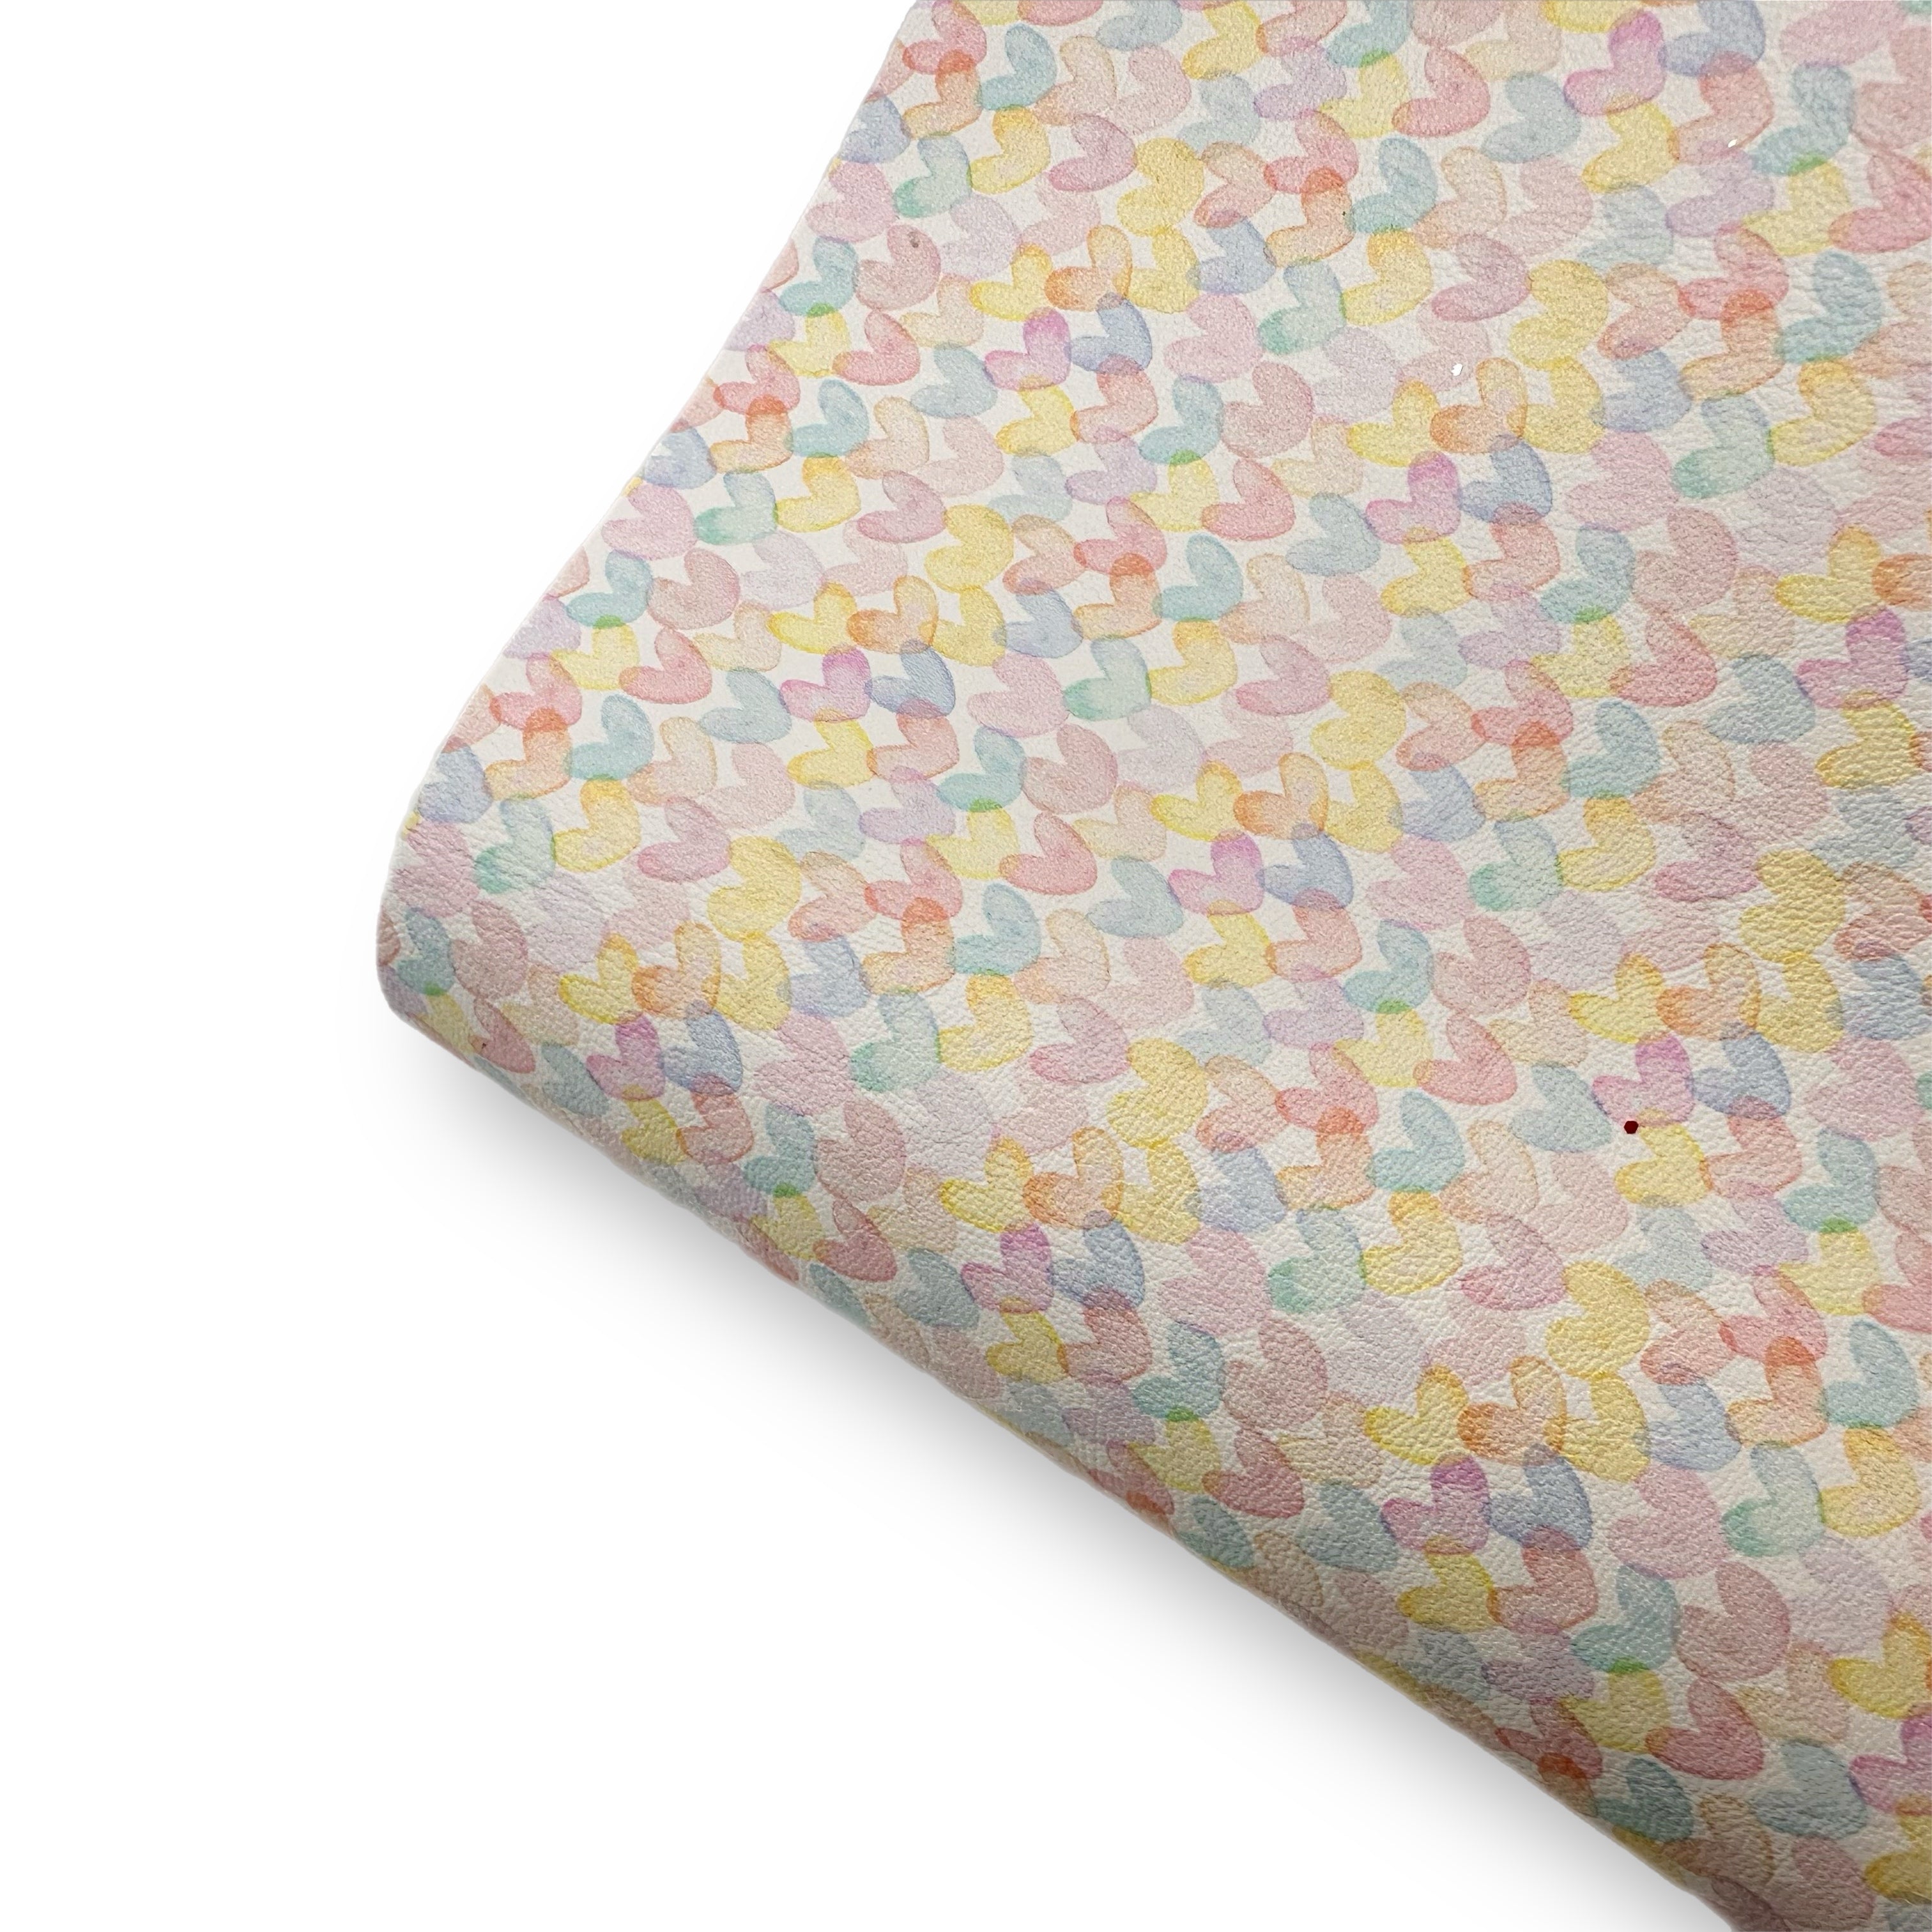 Floating Pastel Hearts Premium Faux Leather Fabric Sheets